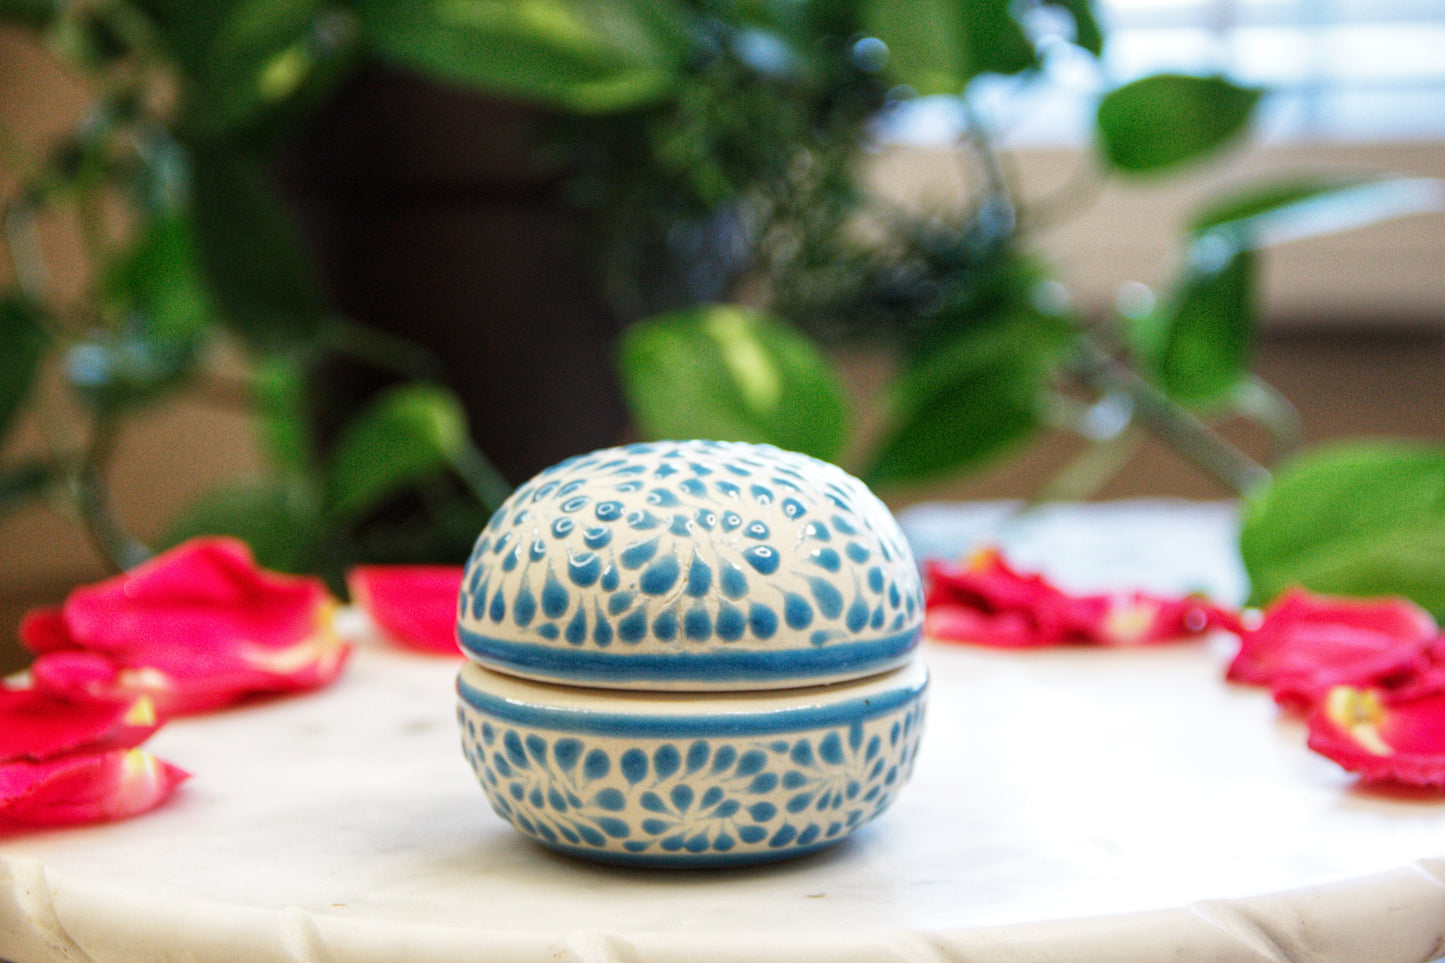 Artisanal candle in a beautiful small talavera cup with a closed lid. Handmade blue strokes design. Handcrafted by Artisan in Mexico City. 100% All Natural Soy Candle. Reuse the talavera as home decor or storage.